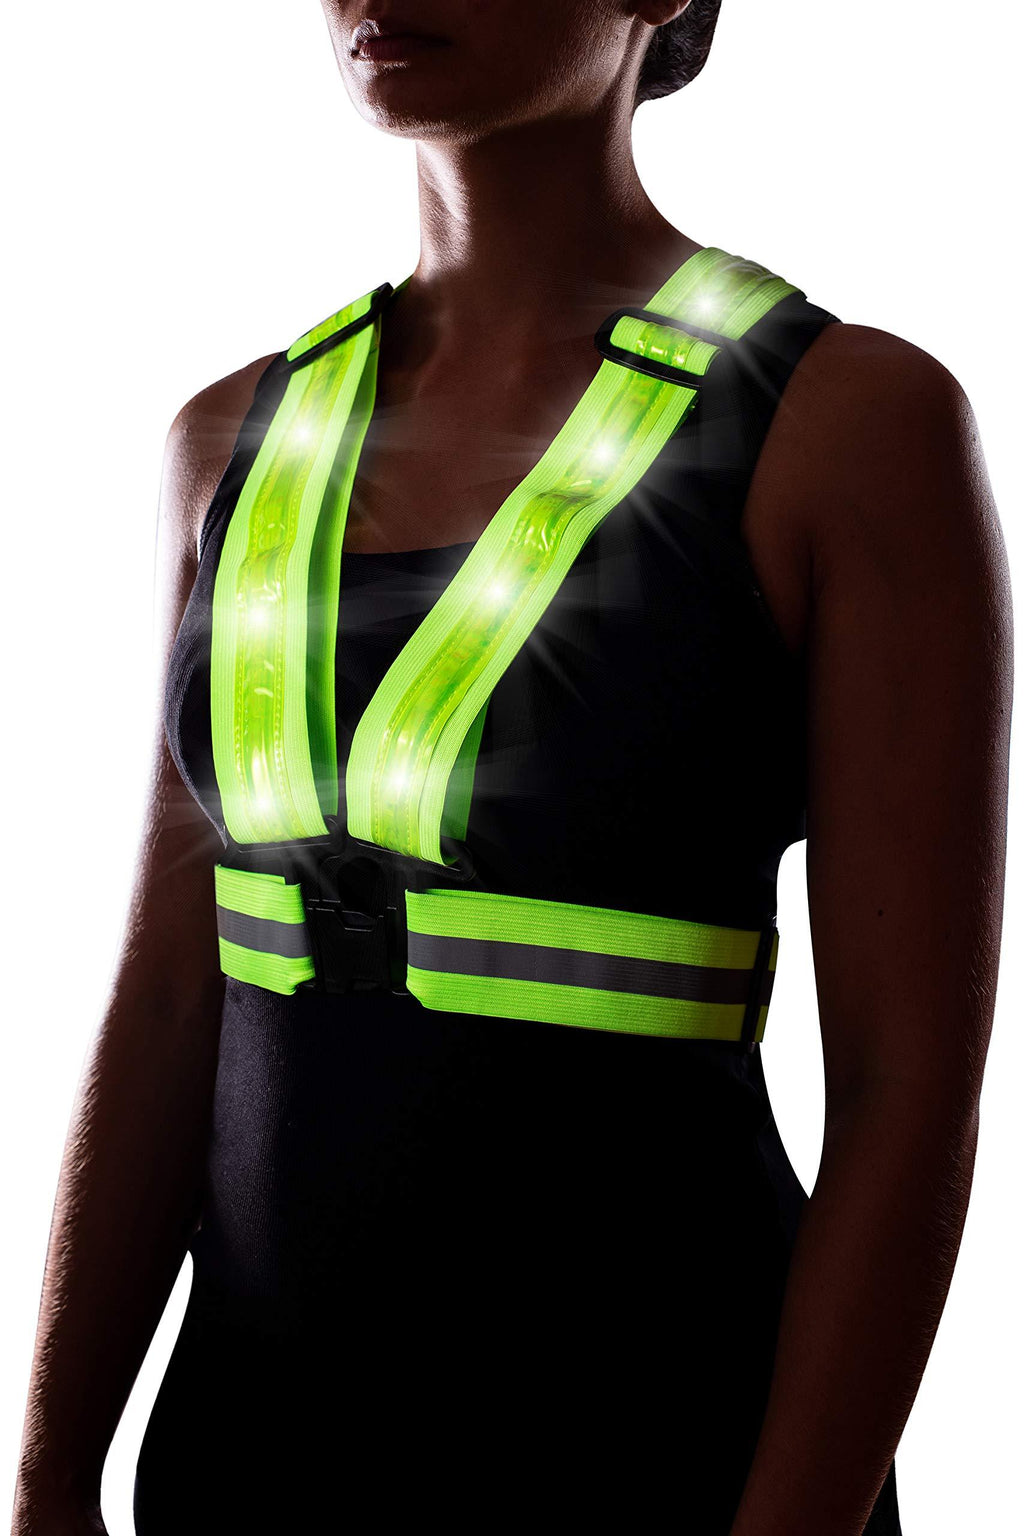 LED Reflective Vest for Running or Cycling USB Rechargeable, High Visibility Safety Vest for Construction, Running Lights for Runners, Motorcycle Vest, Adjustable Reflective Running Gear (Neon Green) - BeesActive Australia